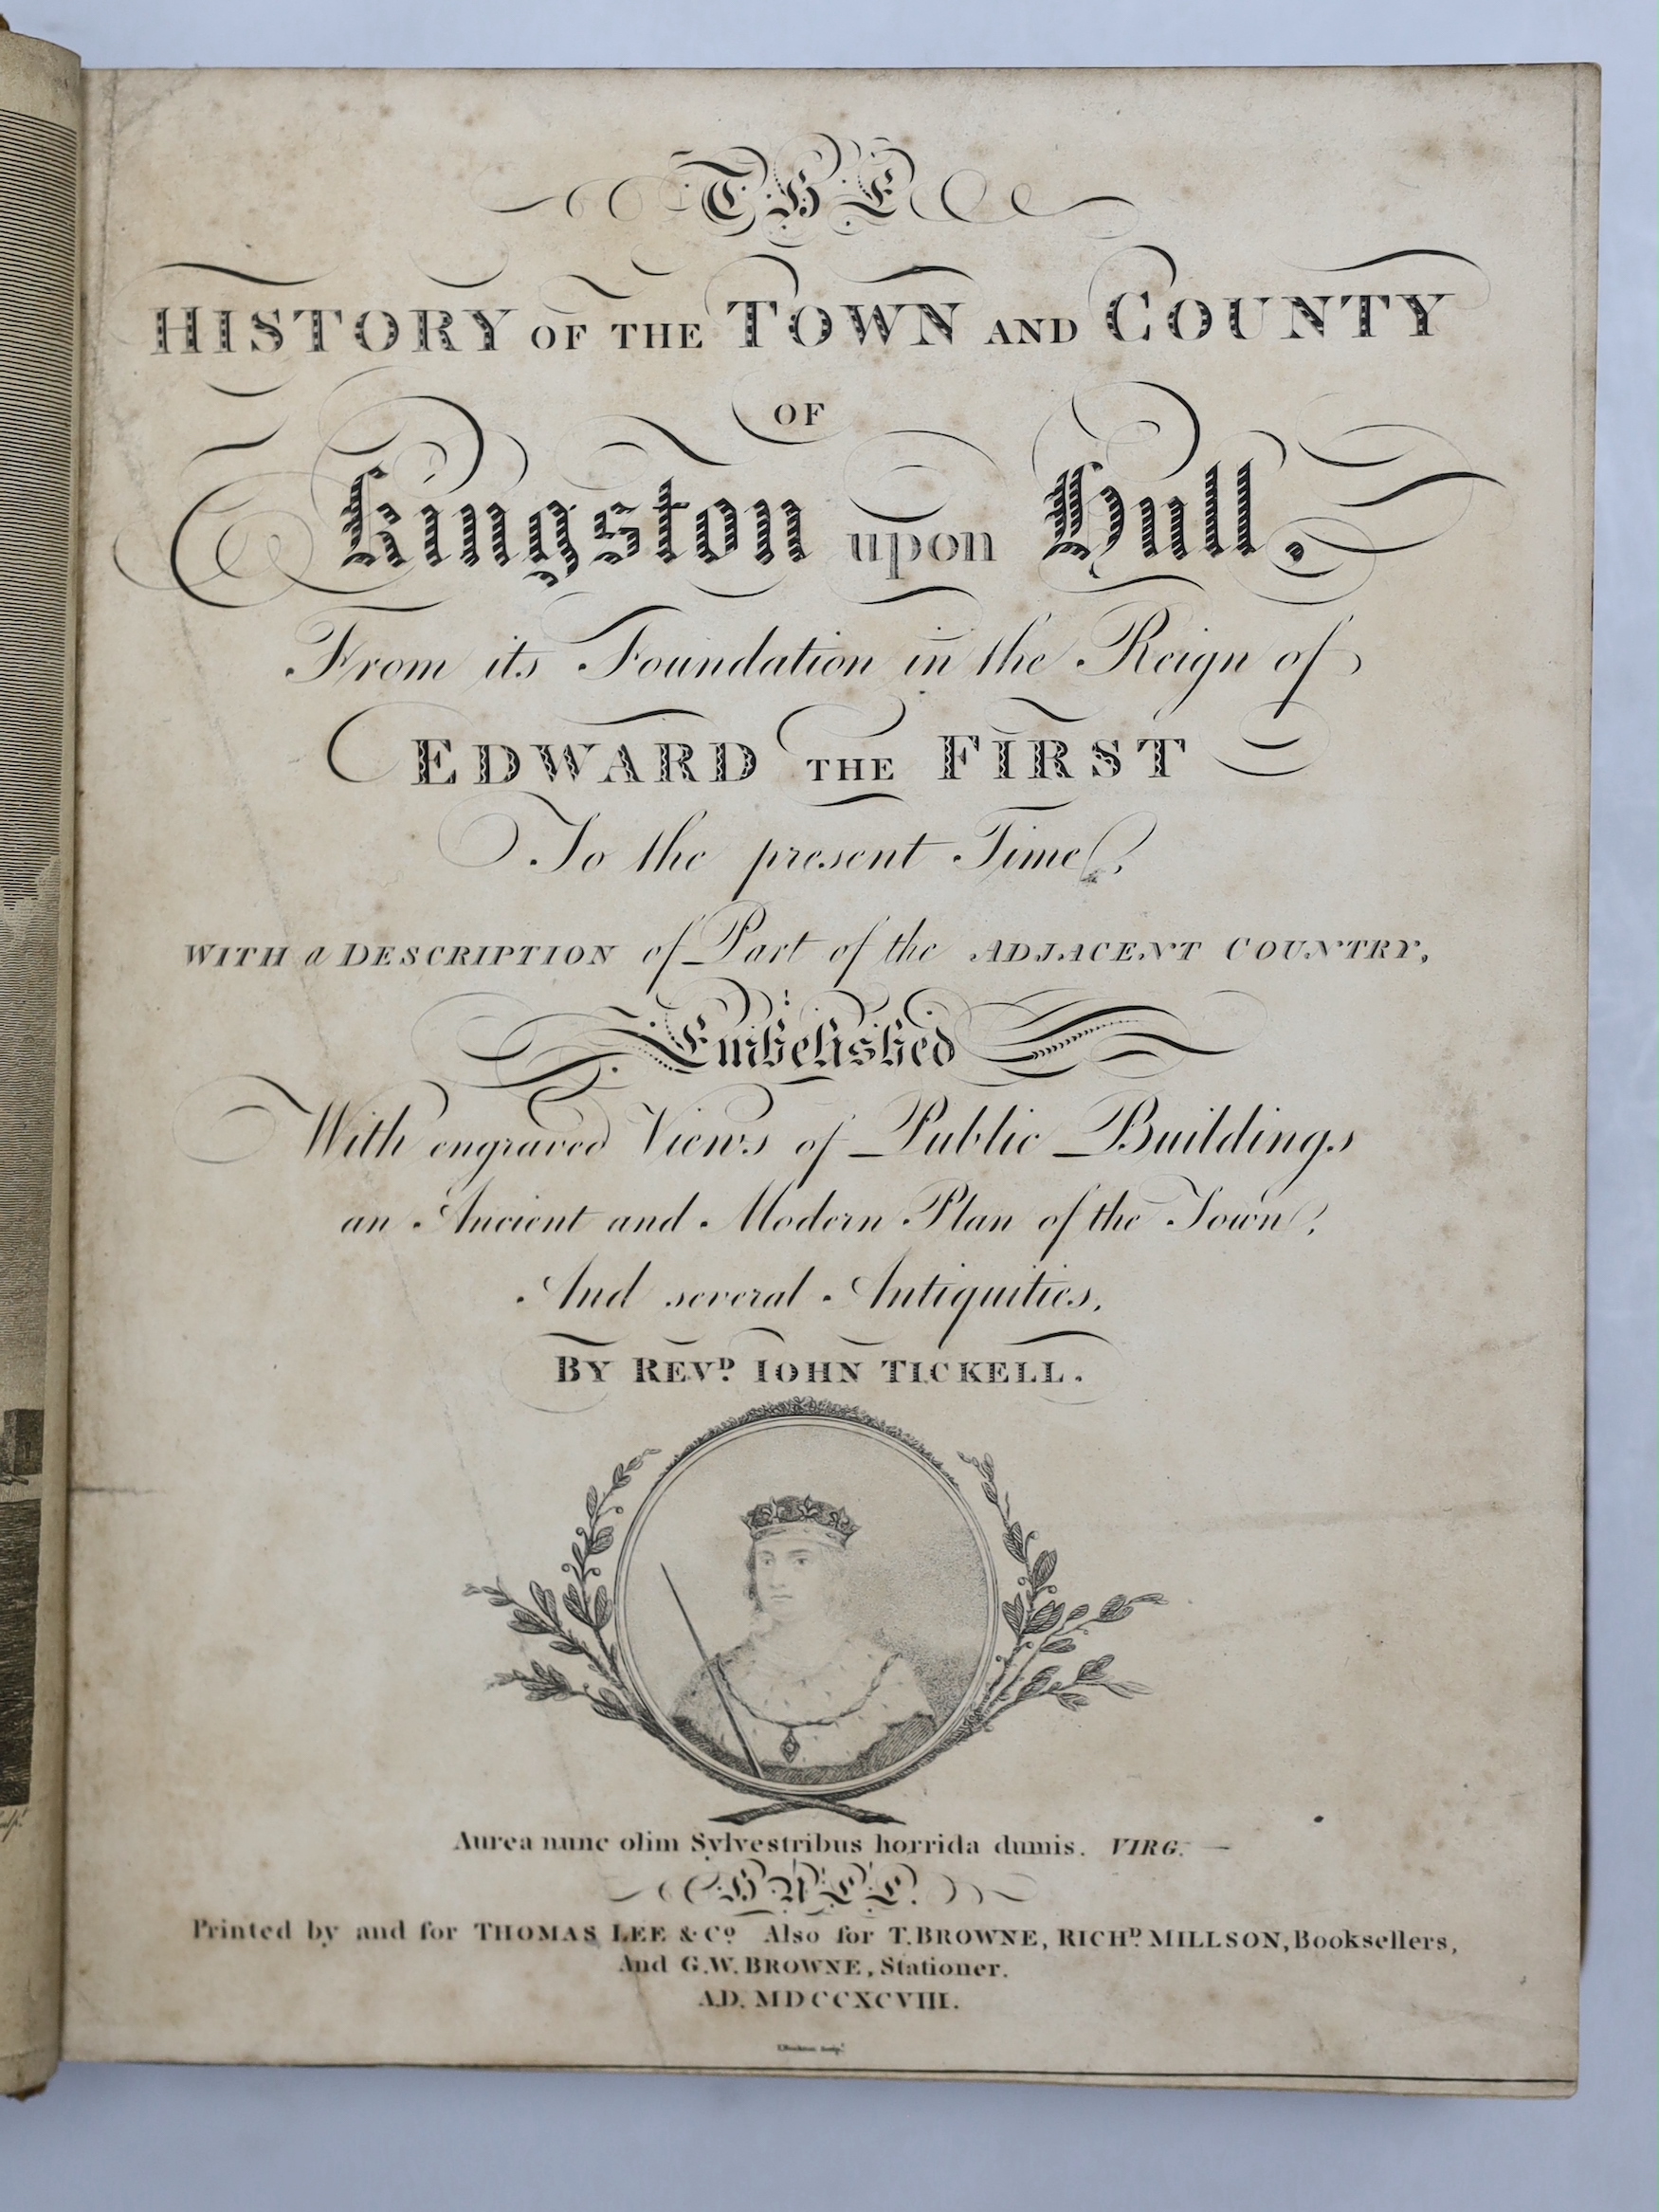 HULL: Tickell, John. The History of the Town and County of Kingston Upon Hull, first edition, folding engraved frontispiece, engraved title, 17 engraved plates including 2 folding, 2pp. dedication to William Wilberforce,